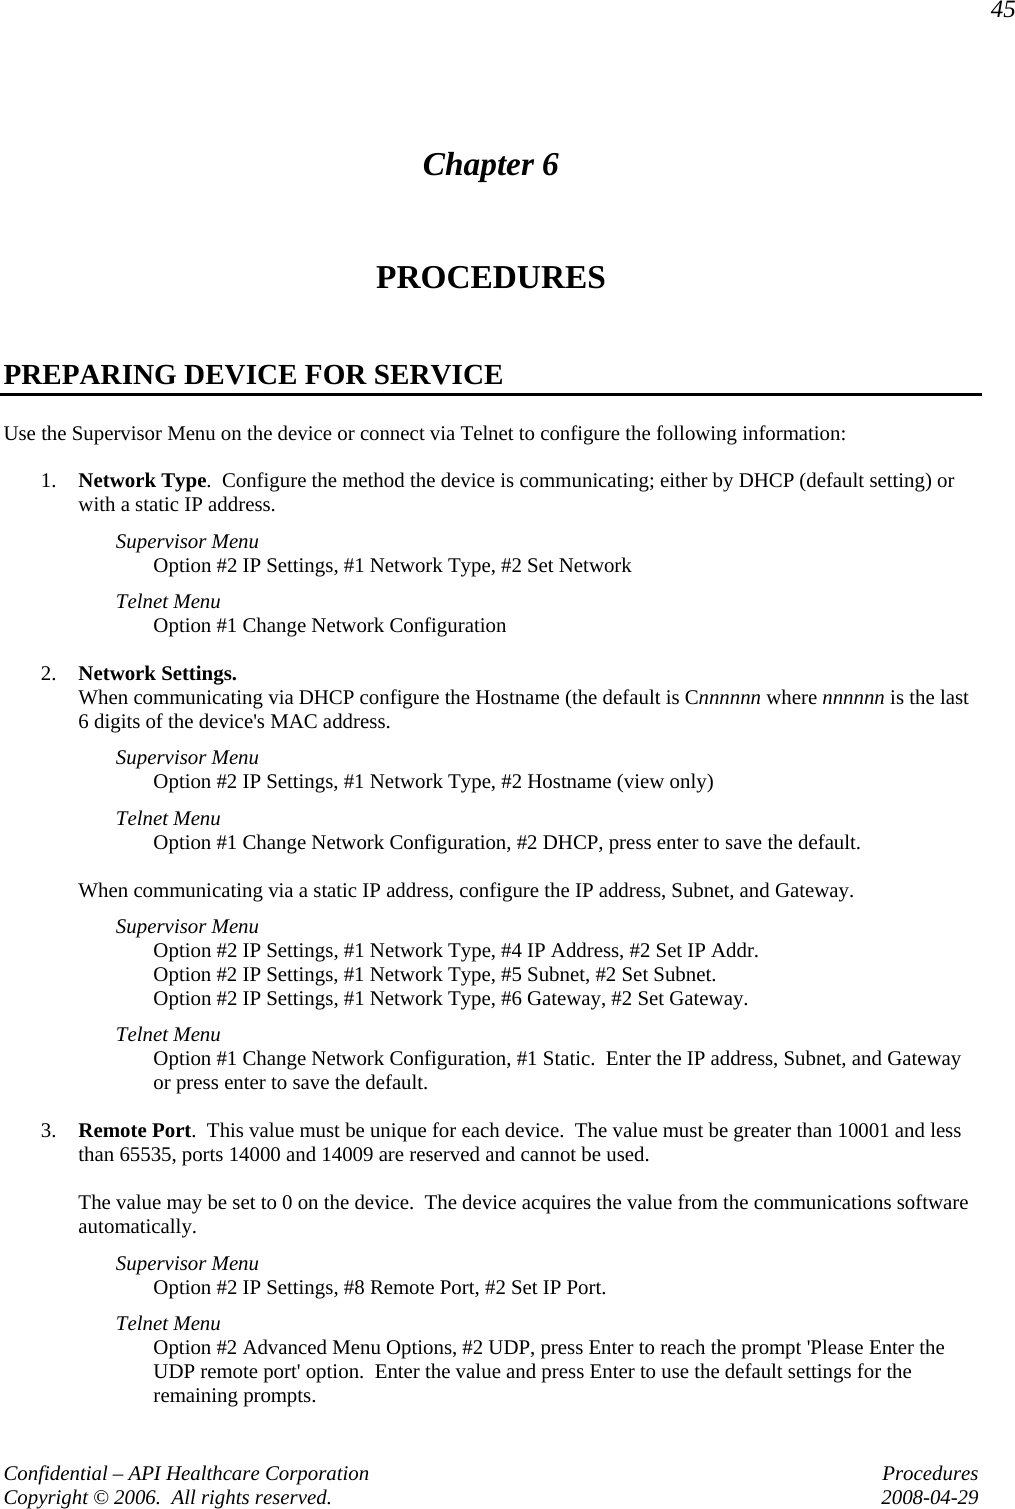 45 Confidential – API Healthcare Corporation  Procedures Copyright © 2006.  All rights reserved.  2008-04-29 Chapter 6 PROCEDURES  PREPARING DEVICE FOR SERVICE Use the Supervisor Menu on the device or connect via Telnet to configure the following information:  1. Network Type.  Configure the method the device is communicating; either by DHCP (default setting) or with a static IP address.   Supervisor Menu Option #2 IP Settings, #1 Network Type, #2 Set Network Telnet Menu Option #1 Change Network Configuration  2. Network Settings.   When communicating via DHCP configure the Hostname (the default is Cnnnnnn where nnnnnn is the last 6 digits of the device&apos;s MAC address.   Supervisor Menu Option #2 IP Settings, #1 Network Type, #2 Hostname (view only) Telnet Menu Option #1 Change Network Configuration, #2 DHCP, press enter to save the default.  When communicating via a static IP address, configure the IP address, Subnet, and Gateway. Supervisor Menu Option #2 IP Settings, #1 Network Type, #4 IP Address, #2 Set IP Addr. Option #2 IP Settings, #1 Network Type, #5 Subnet, #2 Set Subnet. Option #2 IP Settings, #1 Network Type, #6 Gateway, #2 Set Gateway. Telnet Menu Option #1 Change Network Configuration, #1 Static.  Enter the IP address, Subnet, and Gateway or press enter to save the default.  3. Remote Port.  This value must be unique for each device.  The value must be greater than 10001 and less than 65535, ports 14000 and 14009 are reserved and cannot be used.  The value may be set to 0 on the device.  The device acquires the value from the communications software automatically.   Supervisor Menu Option #2 IP Settings, #8 Remote Port, #2 Set IP Port. Telnet Menu Option #2 Advanced Menu Options, #2 UDP, press Enter to reach the prompt &apos;Please Enter the UDP remote port&apos; option.  Enter the value and press Enter to use the default settings for the remaining prompts. 